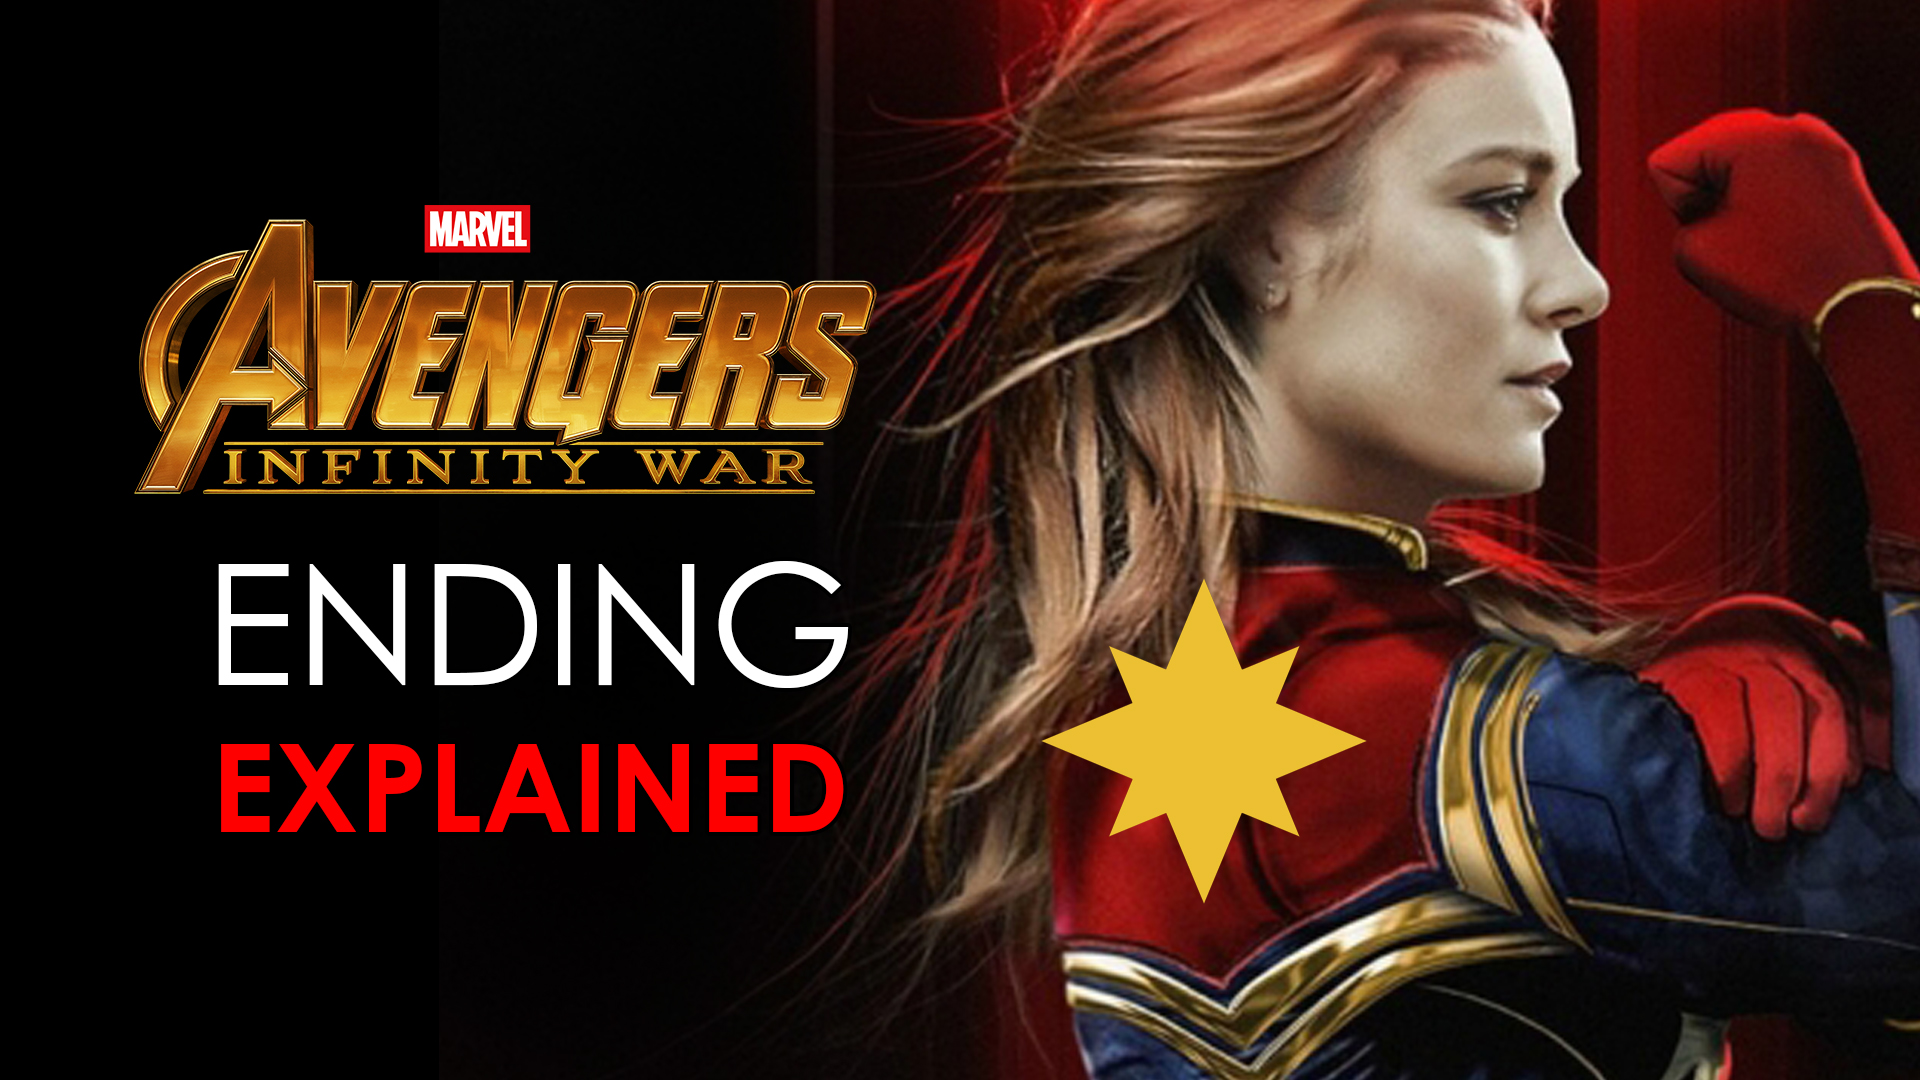 Avengers infinity war ending explained and post credit scenes revealed full spoilers and review what does captain marvel mean